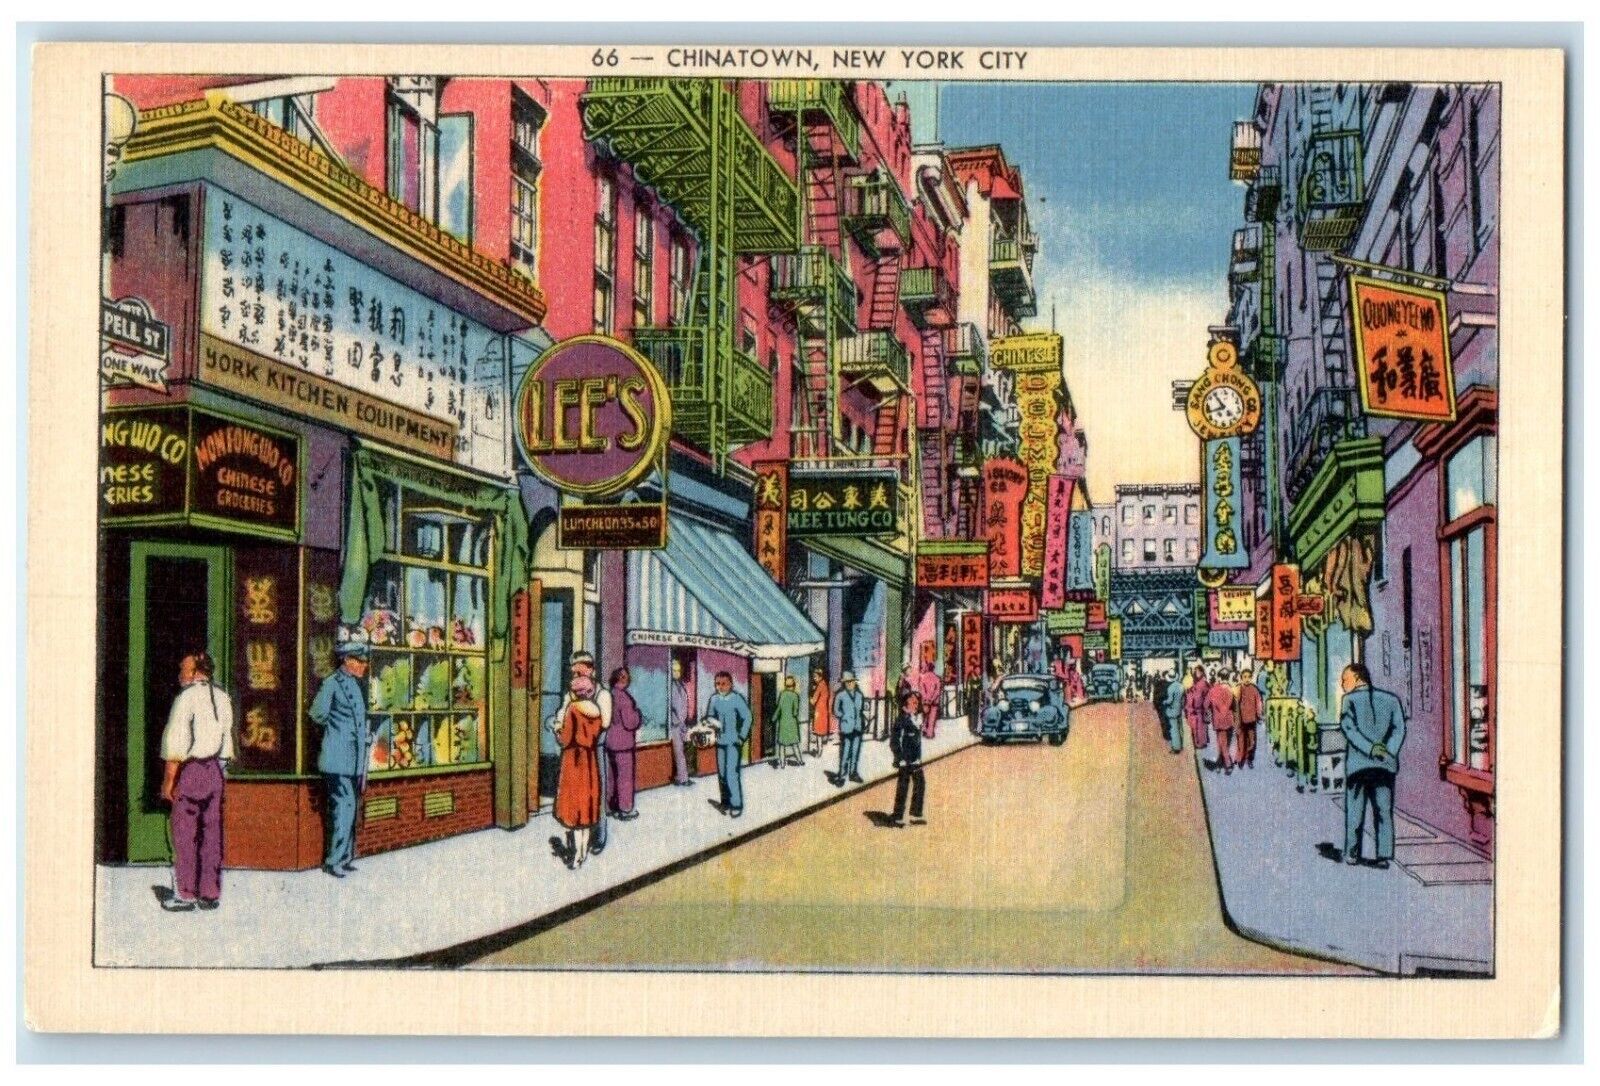 c1930s Business Section Restaurant Gift Shop Chinatown New York City NY Postcard